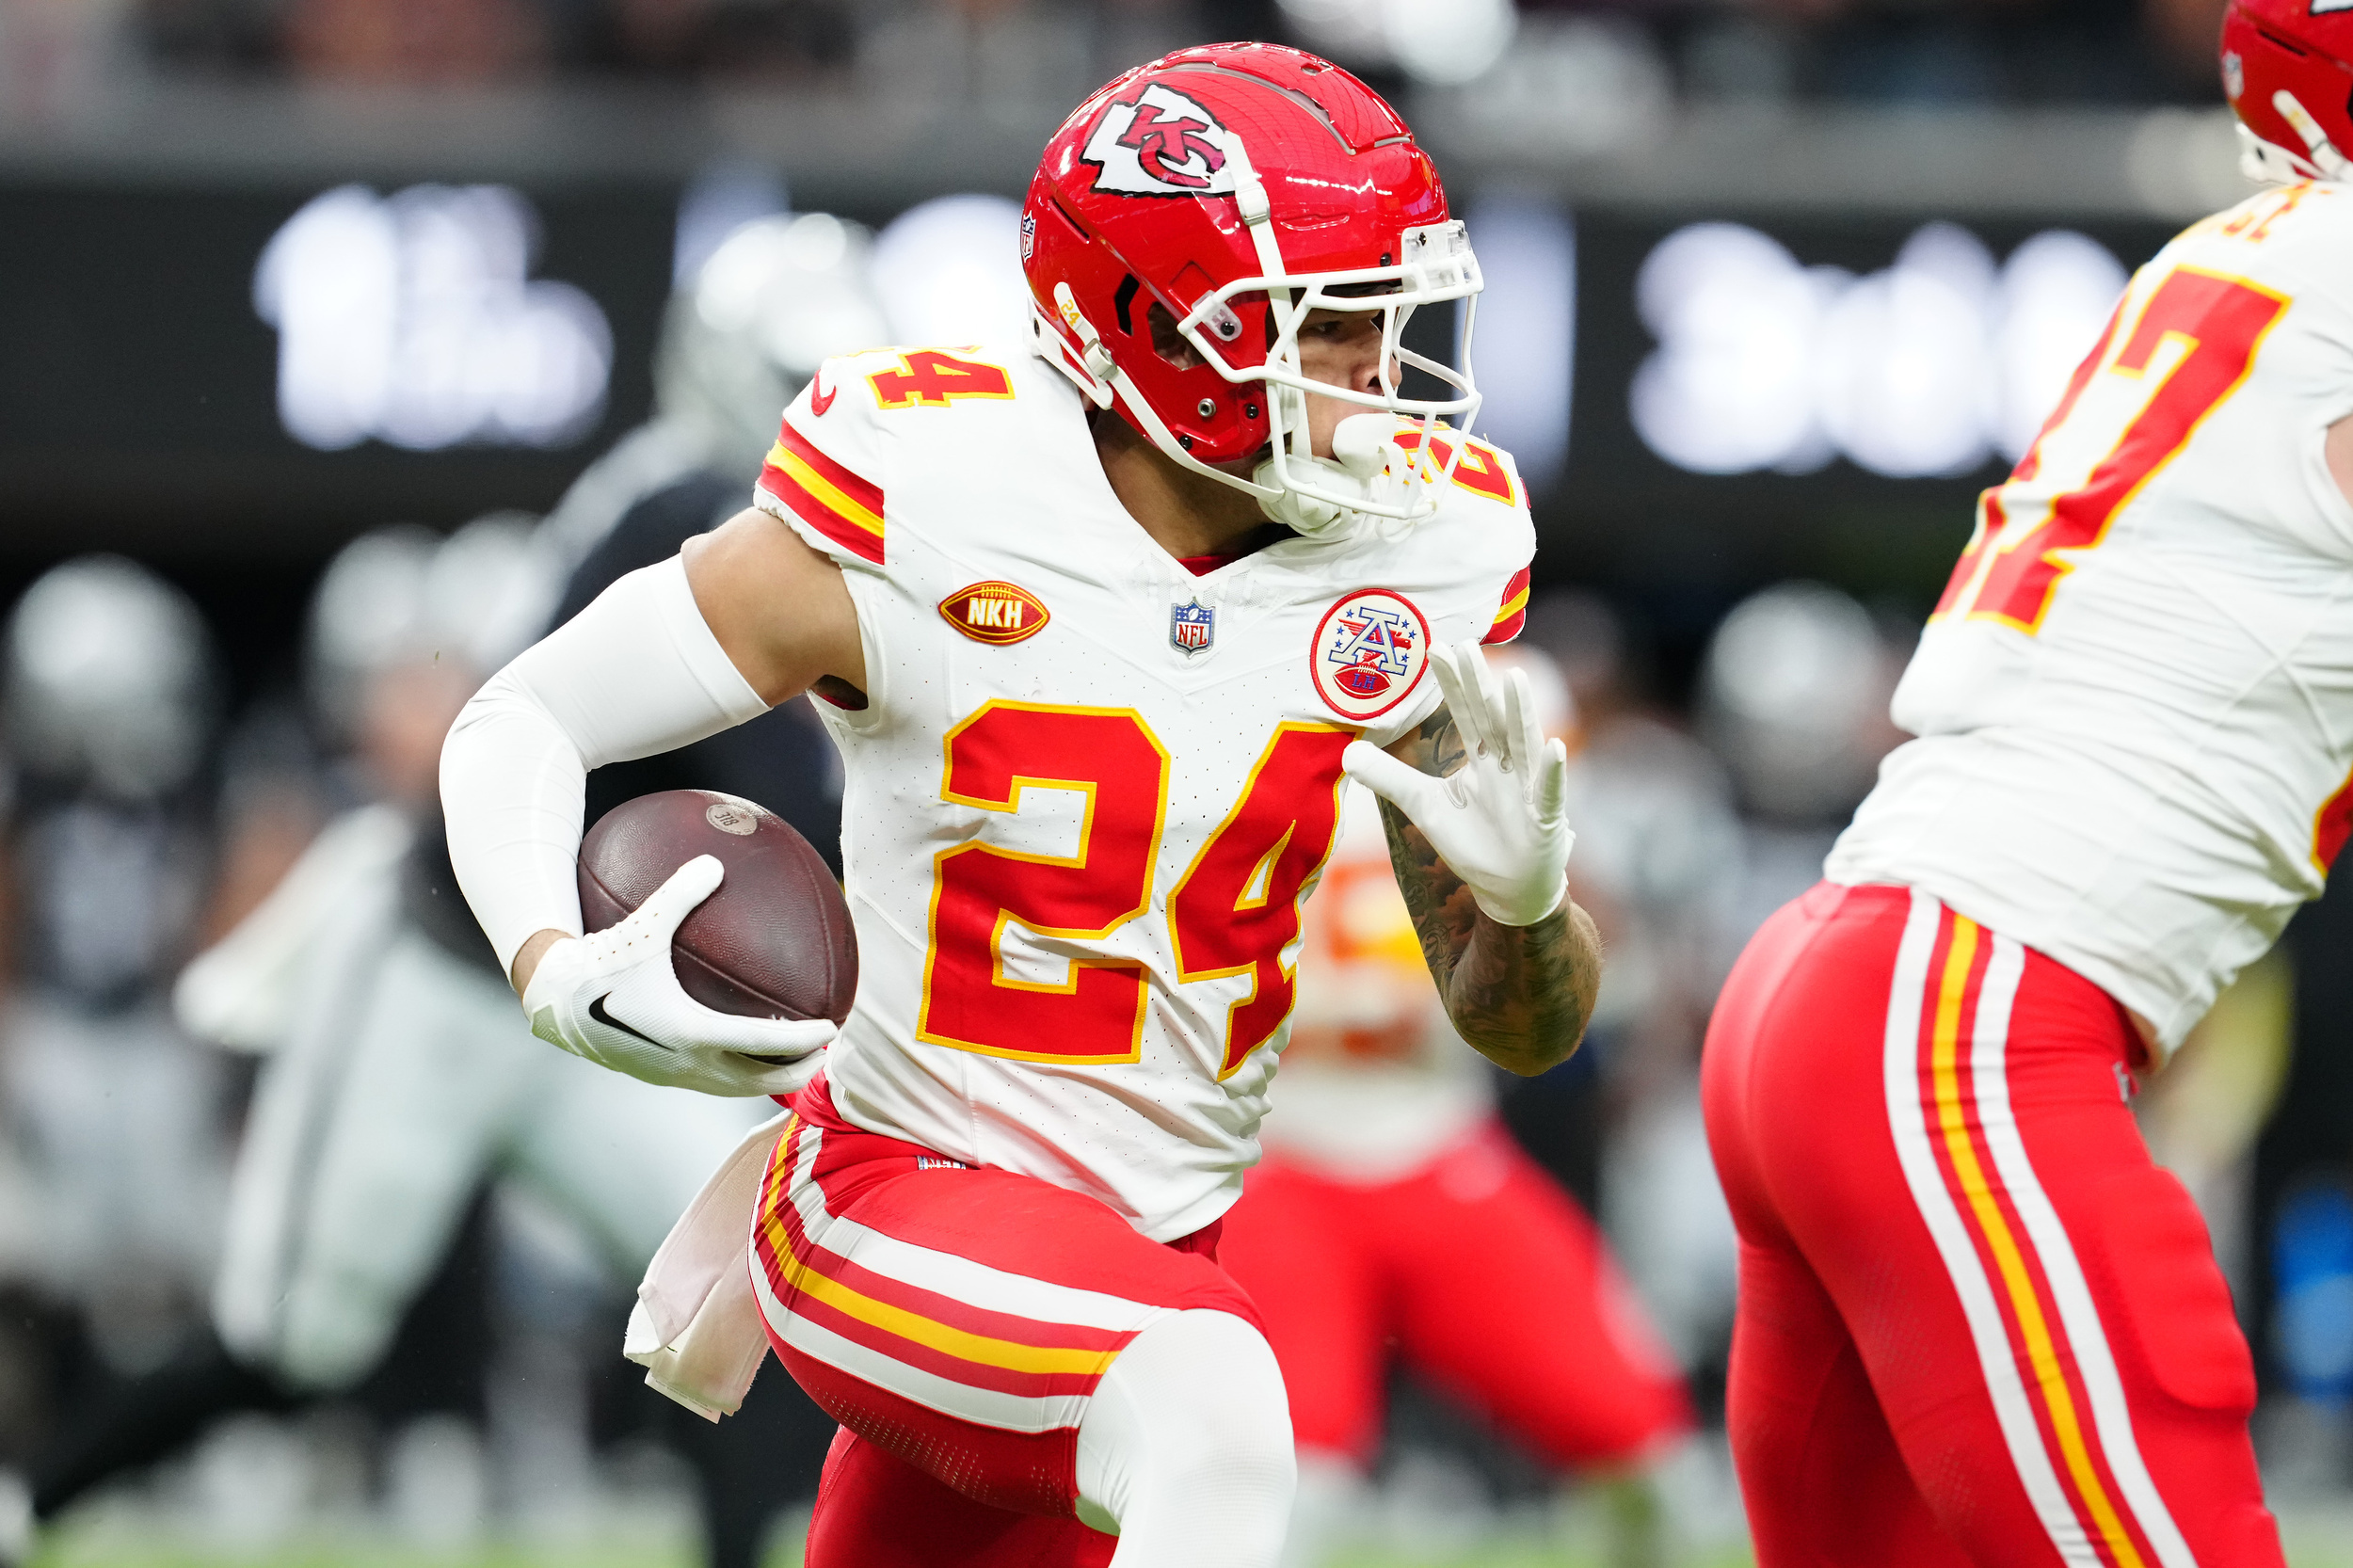 chiefs activate 2nd-year wr ahead of super bowl